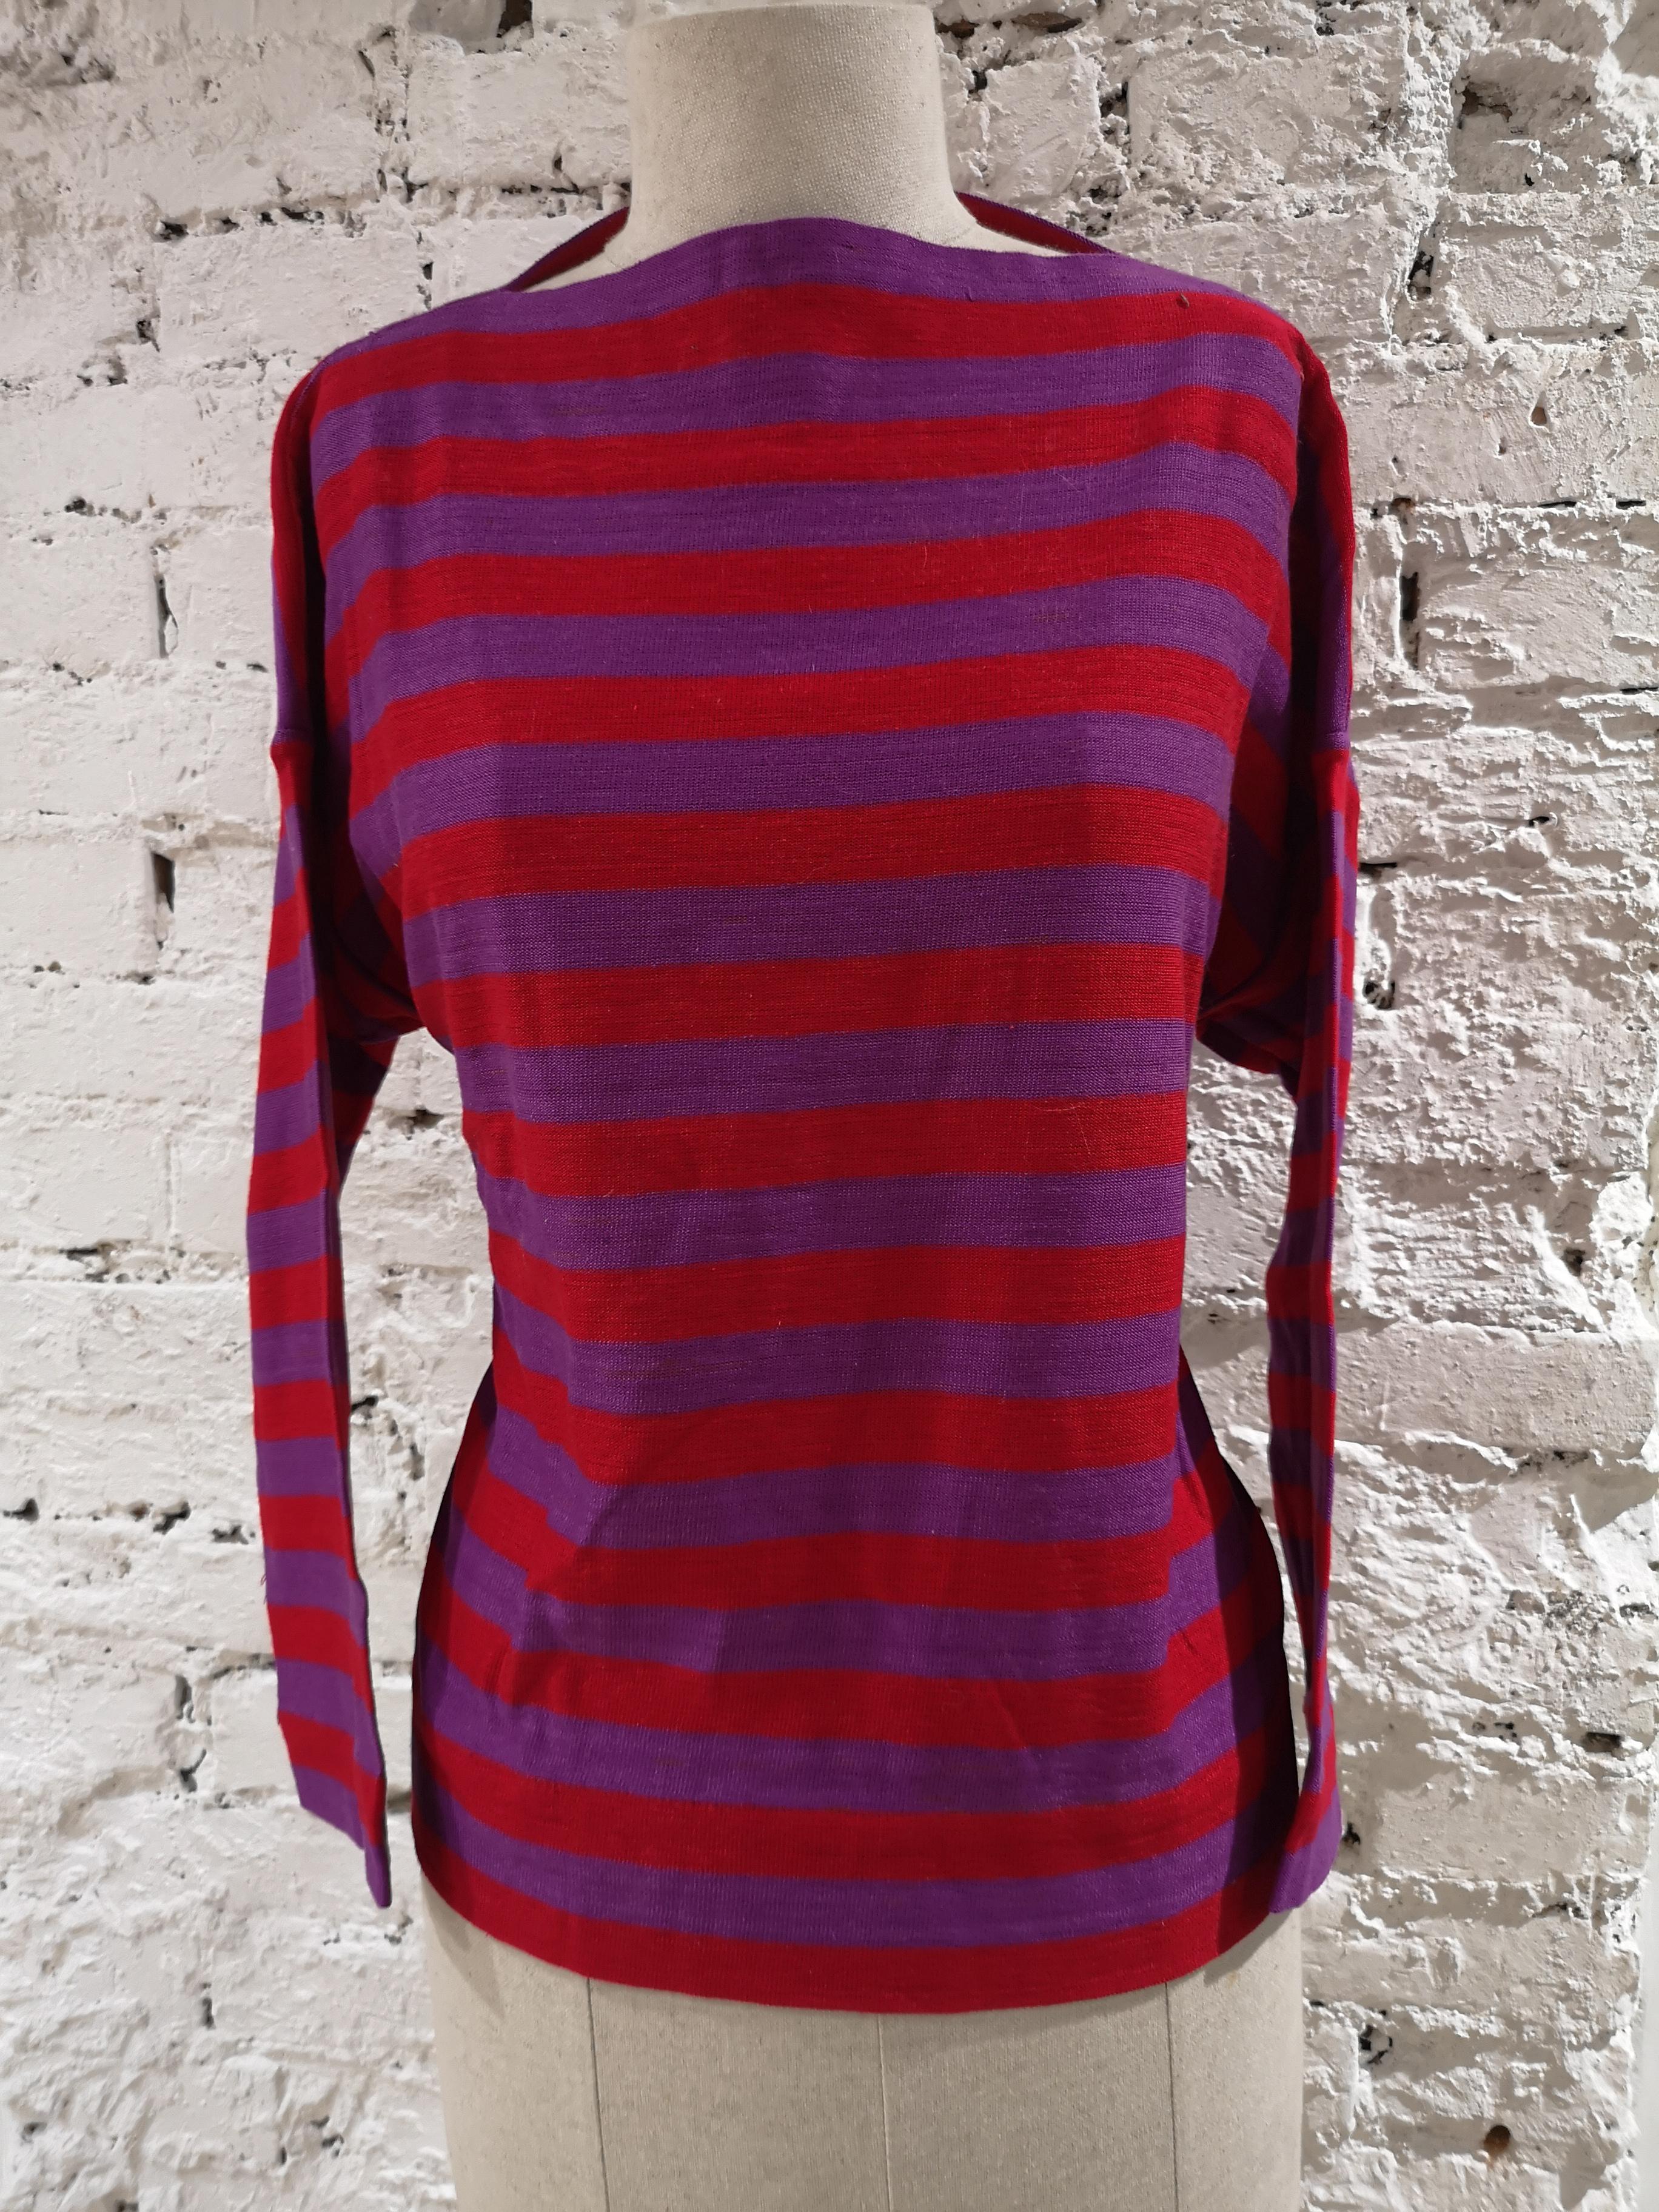 red and purple striped shirt